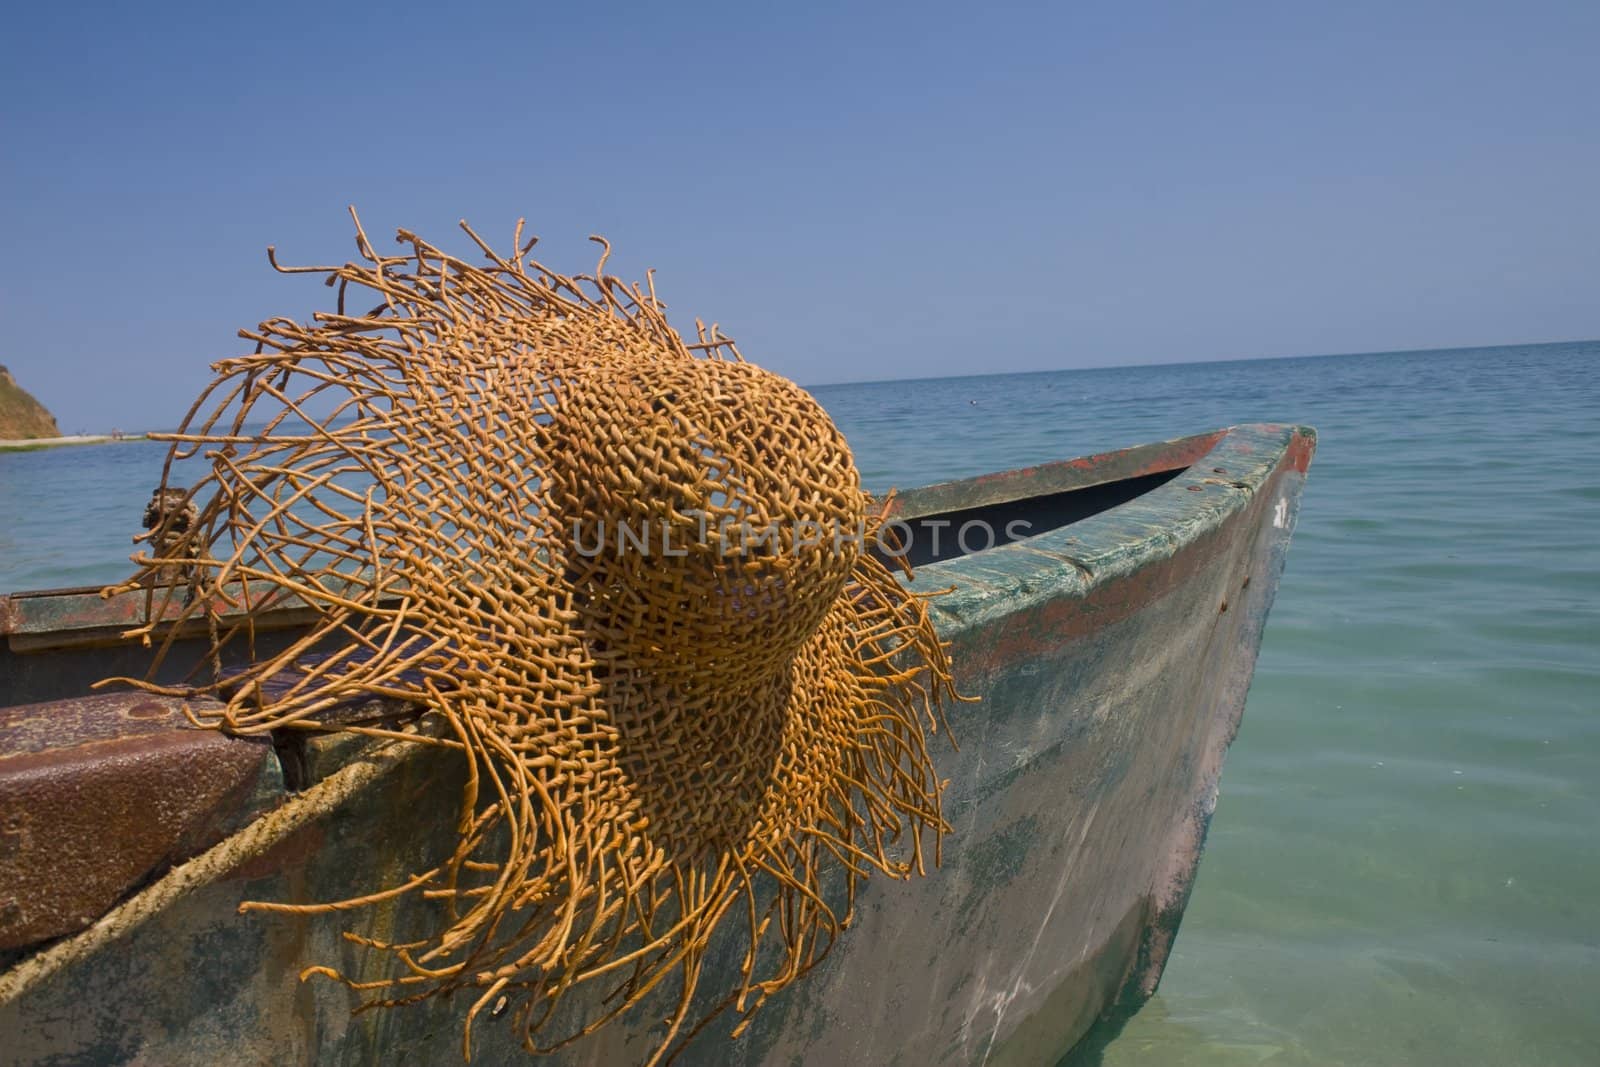 Serene scene with old fishing boat and large straw hat hanging from cleat